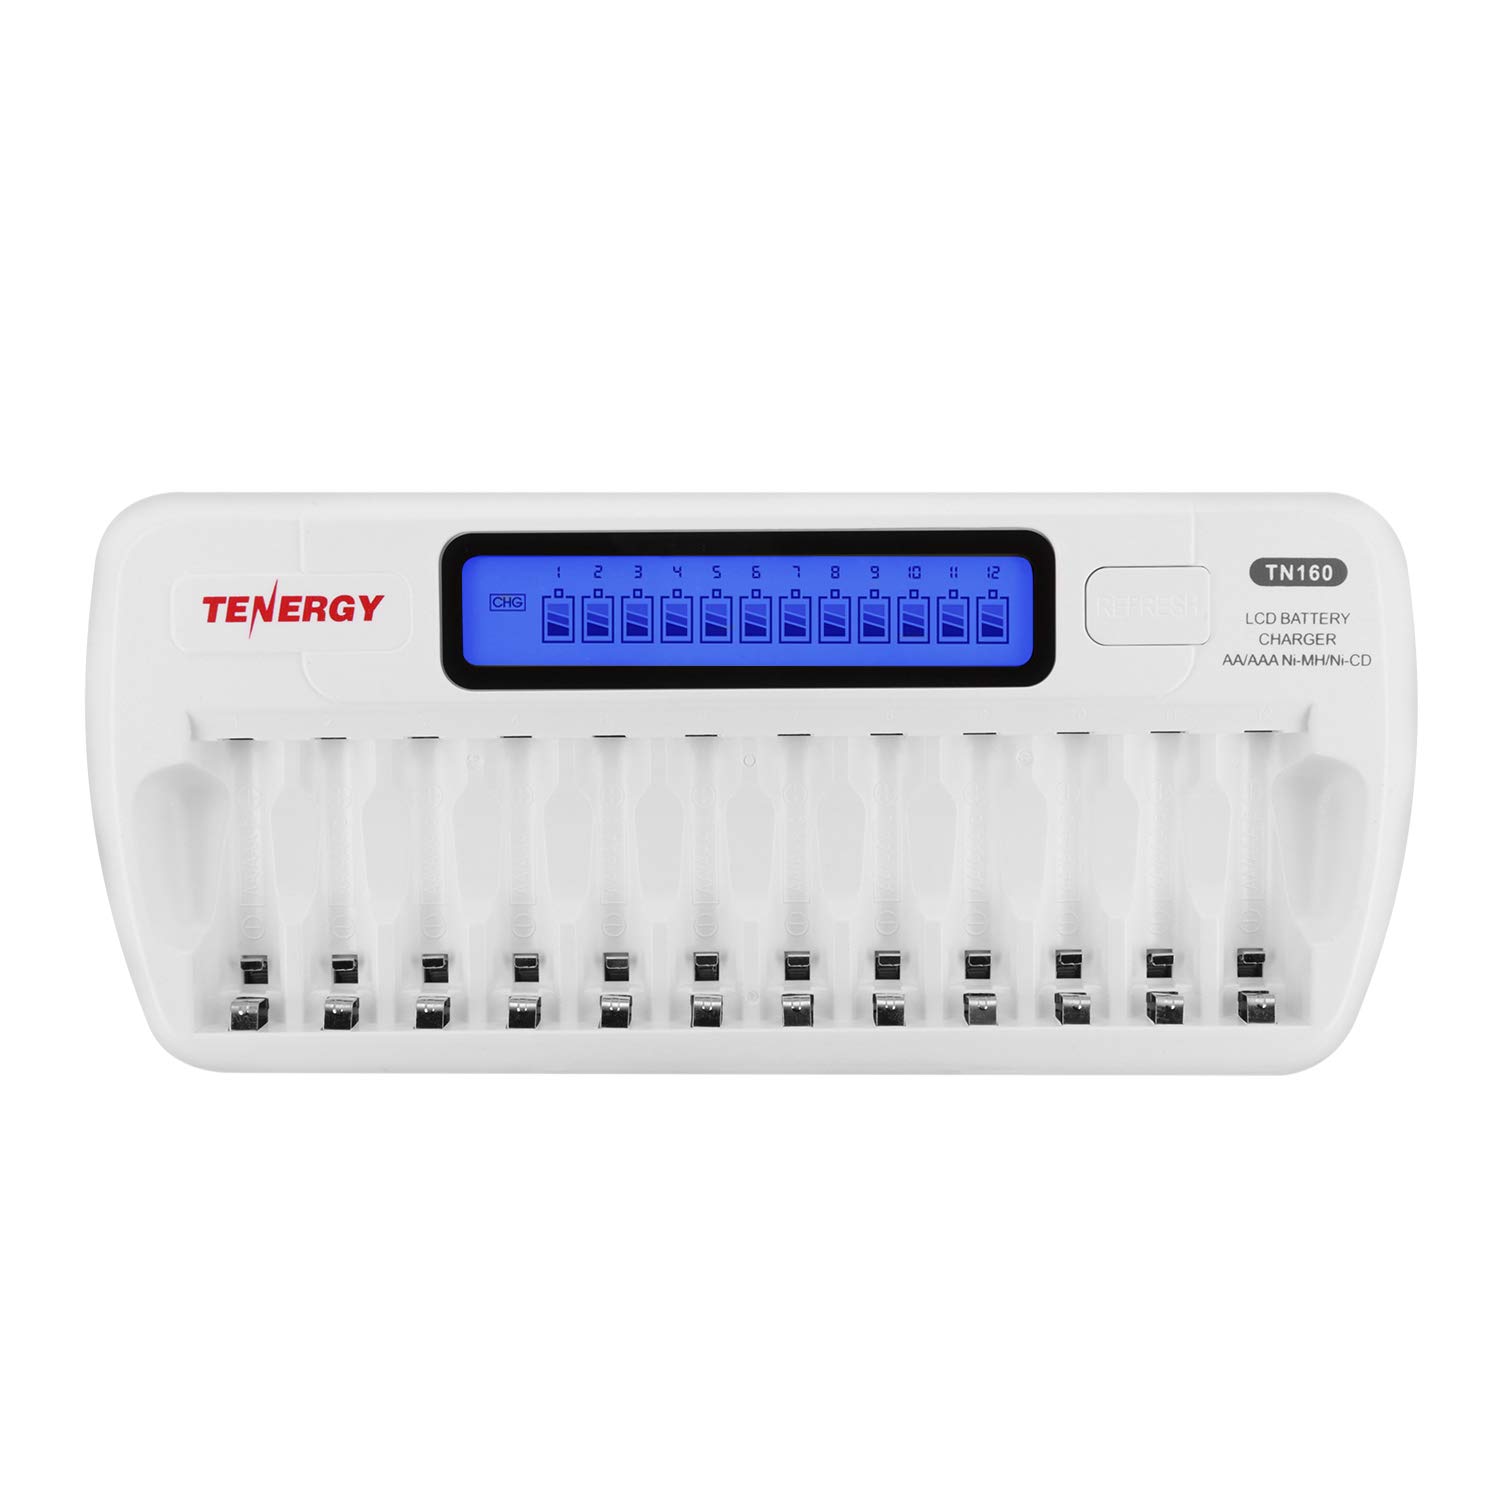 Tenergy TN160 LCD Battery Charger 12-Bay Smart Battery Charger for AA/AAA NiMH/NiCd Rechargeable Batteries Charger with Refresh Function Household Battery Charger w/AC Wall Adapter